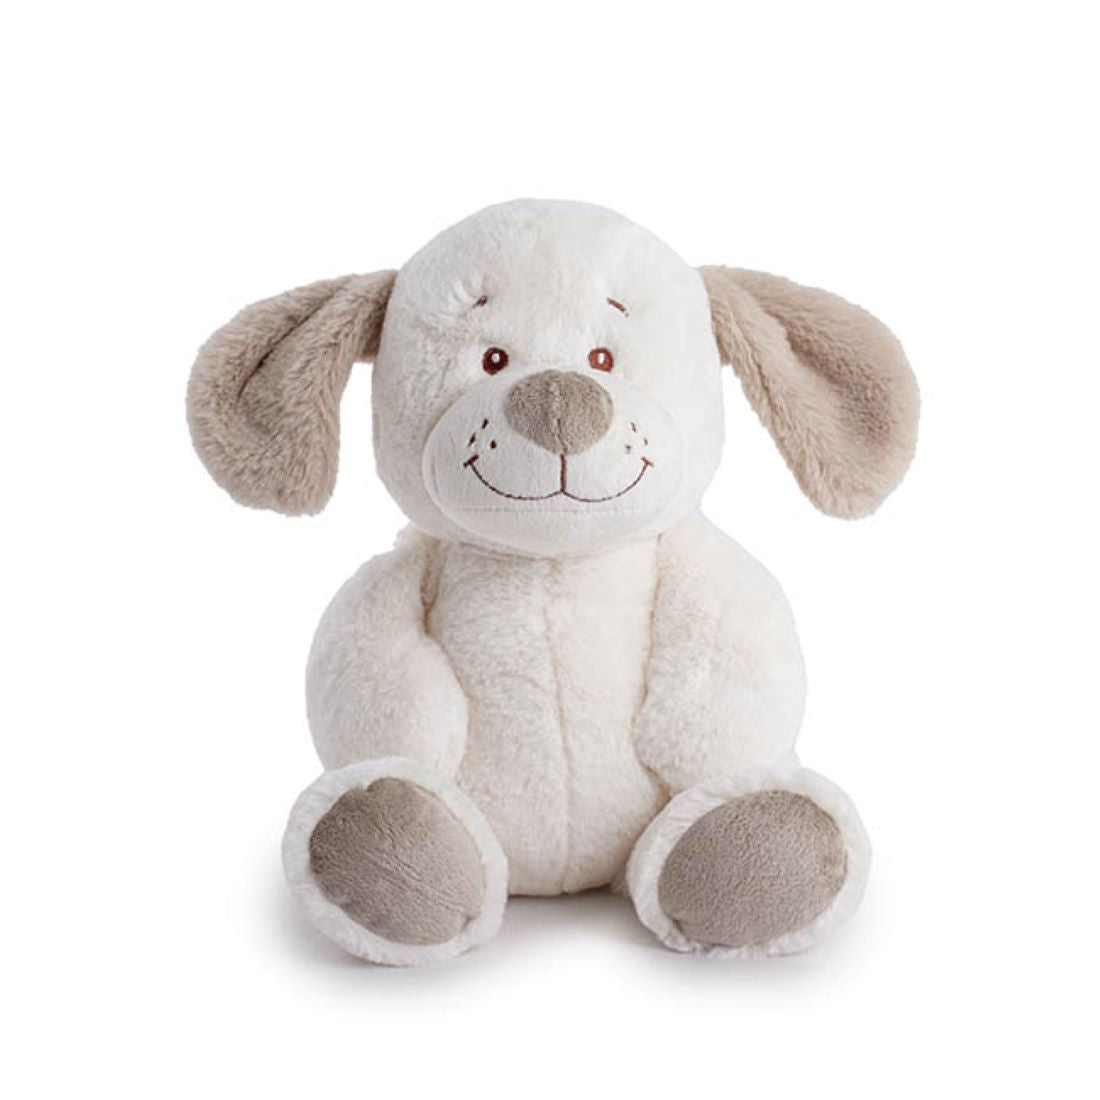 Hugo The Plush White Puppy with Floppy Brown Ears Soft Toy